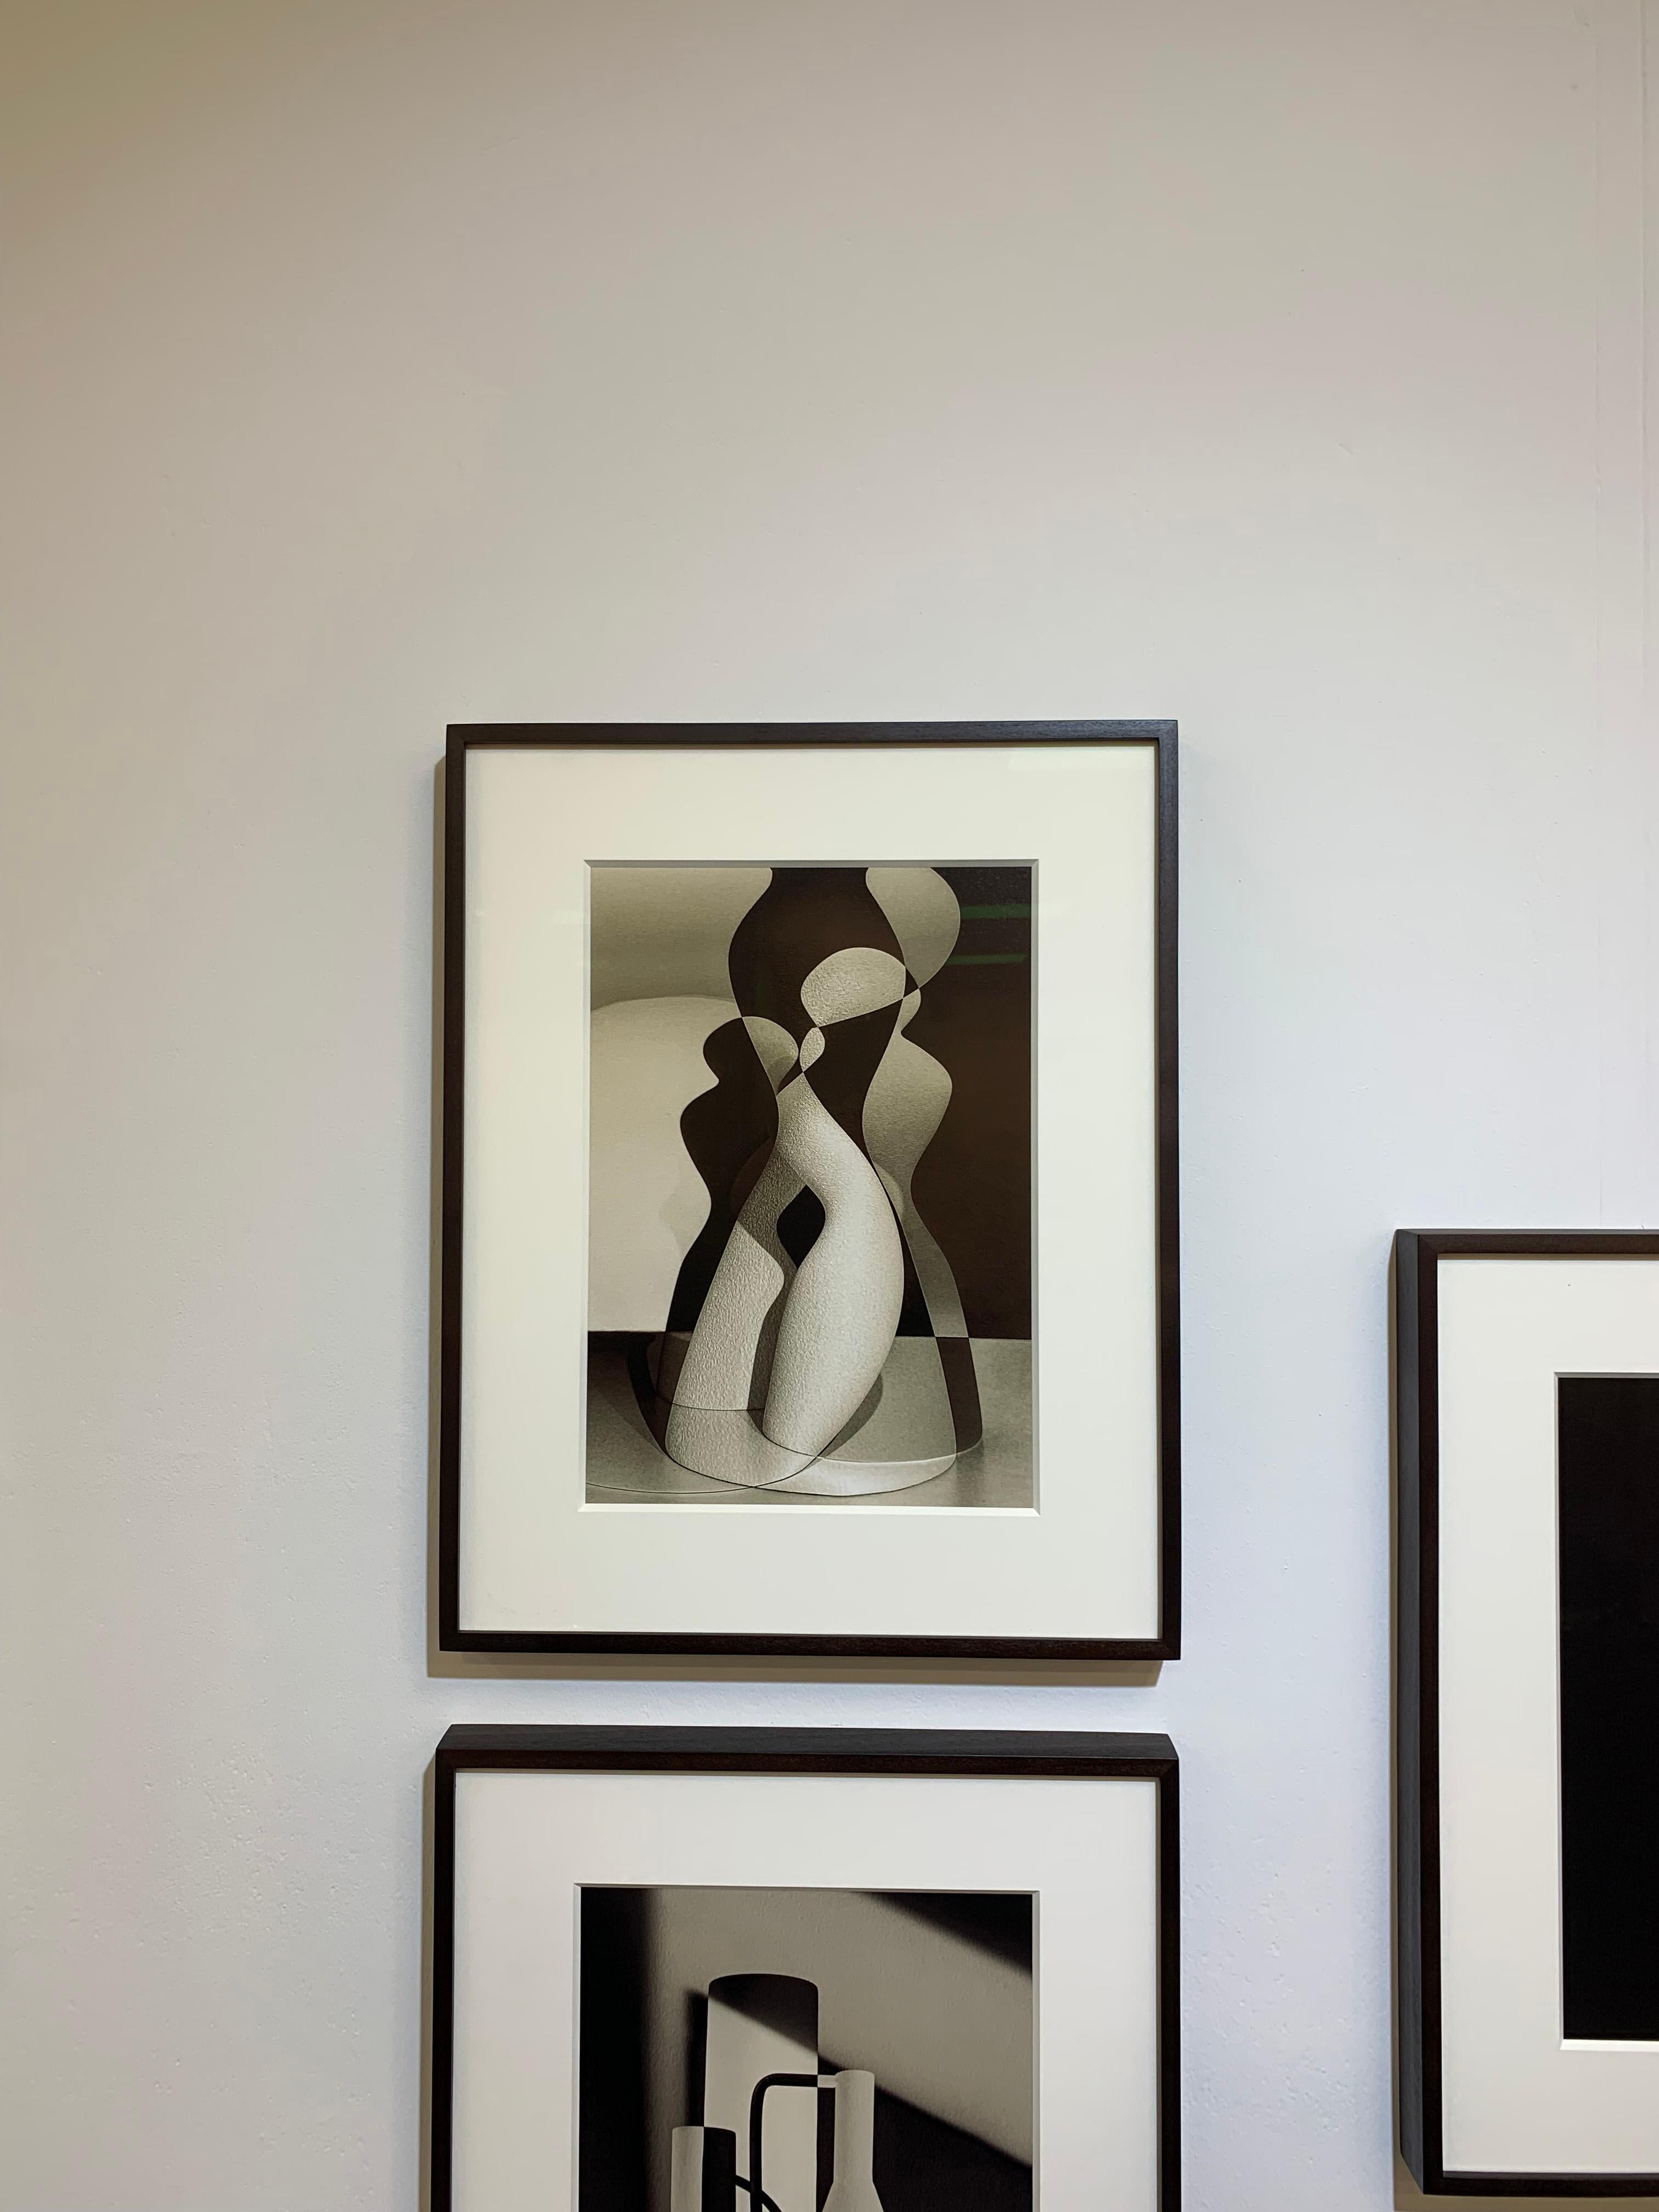 In Between the shadows, Cubist sculpture, female figure abstract prints - Print by Sander Vos